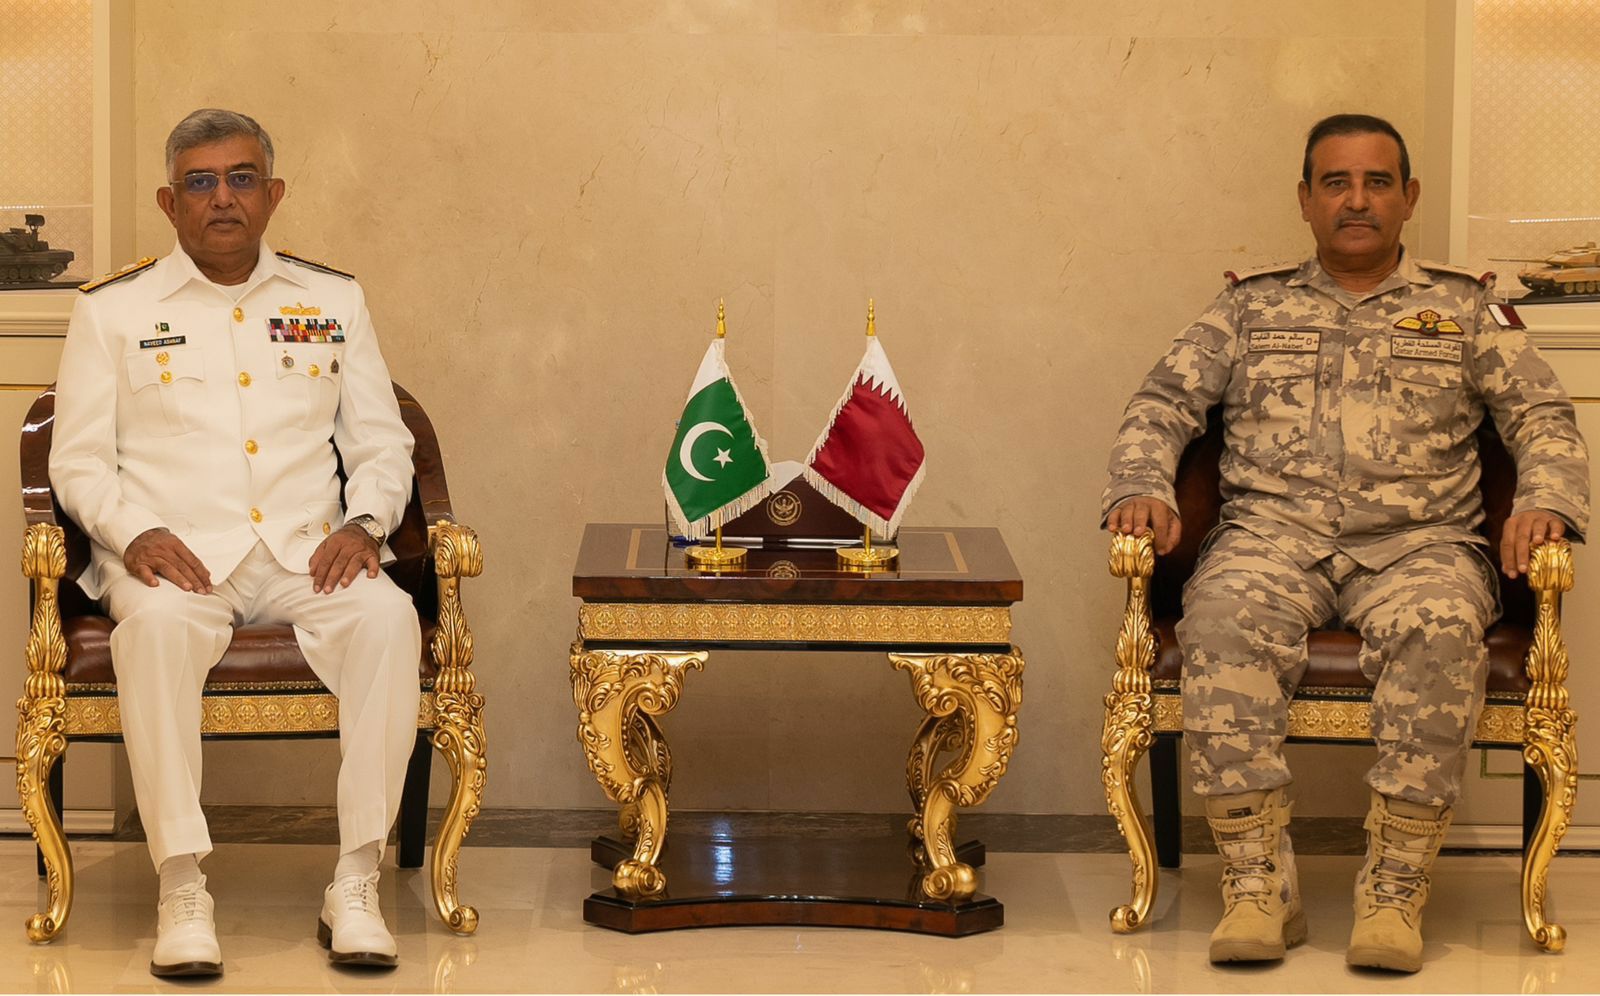 CHIEF OF THE NAVAL STAFF VISITS QATAR AND MEETS TOP MILITARY LEADERSHIP